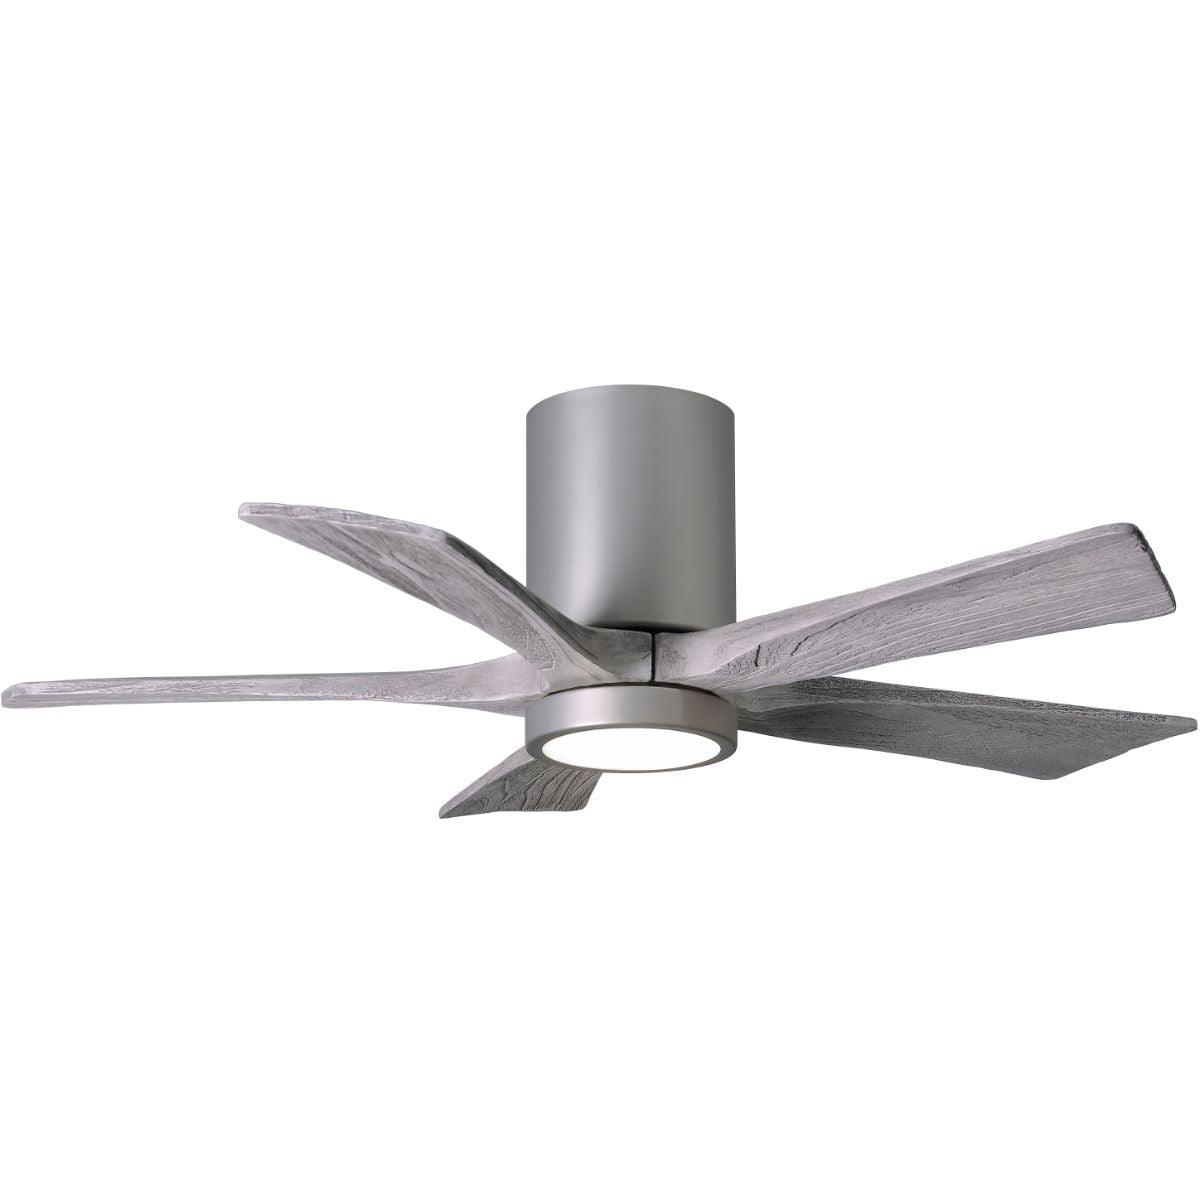 Irene 42 Inch Modern Outdoor Ceiling Fan With Light, Wall And Remote Control Included - Bees Lighting